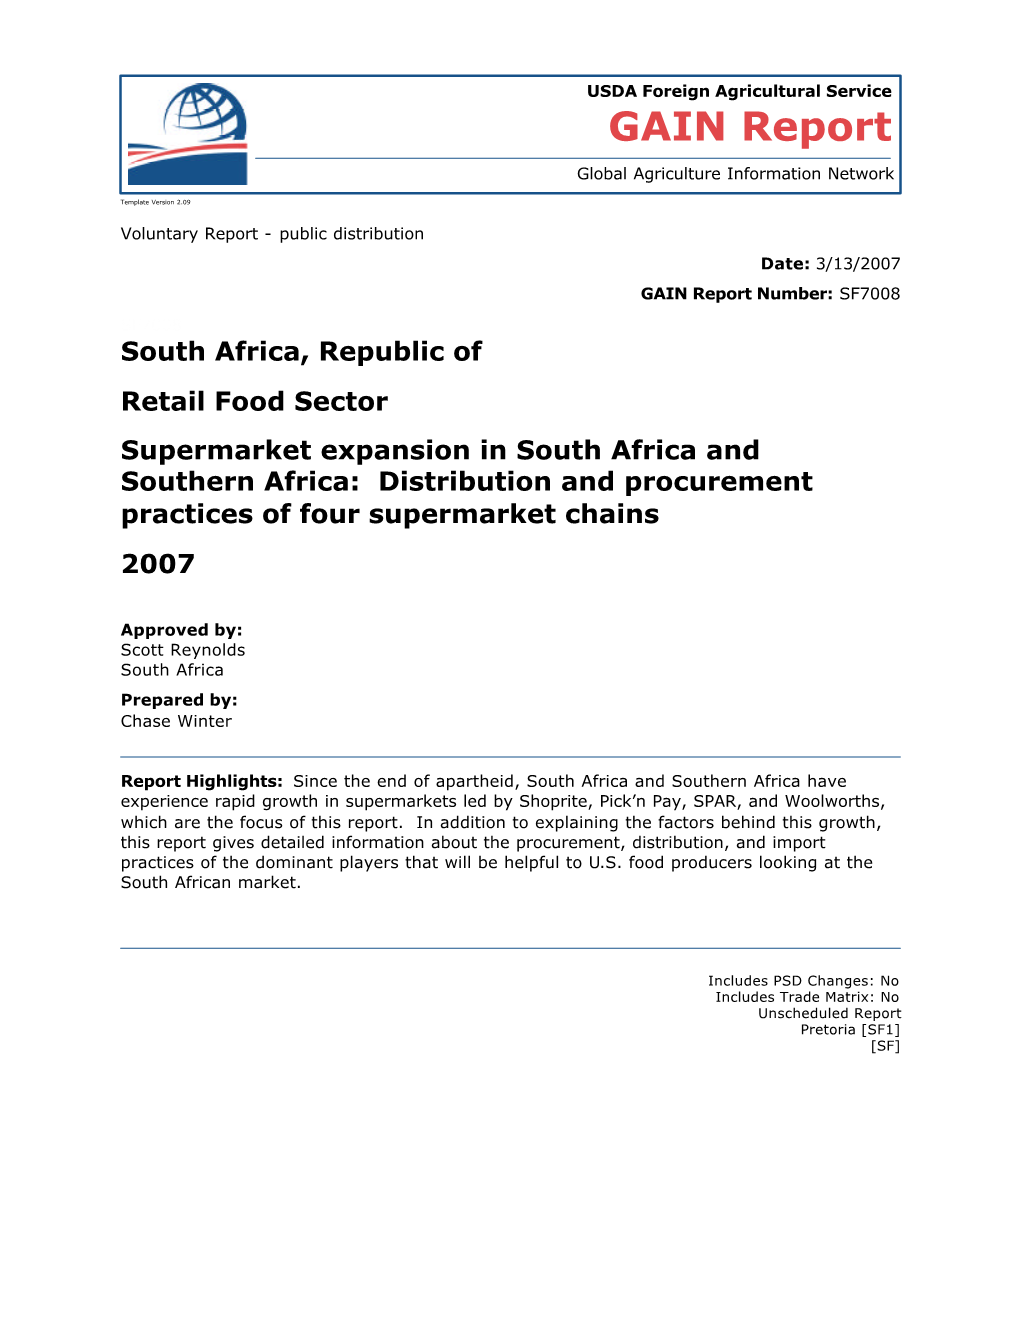 Distribution and Procurement Practices of Four Supermarket Chains 2007